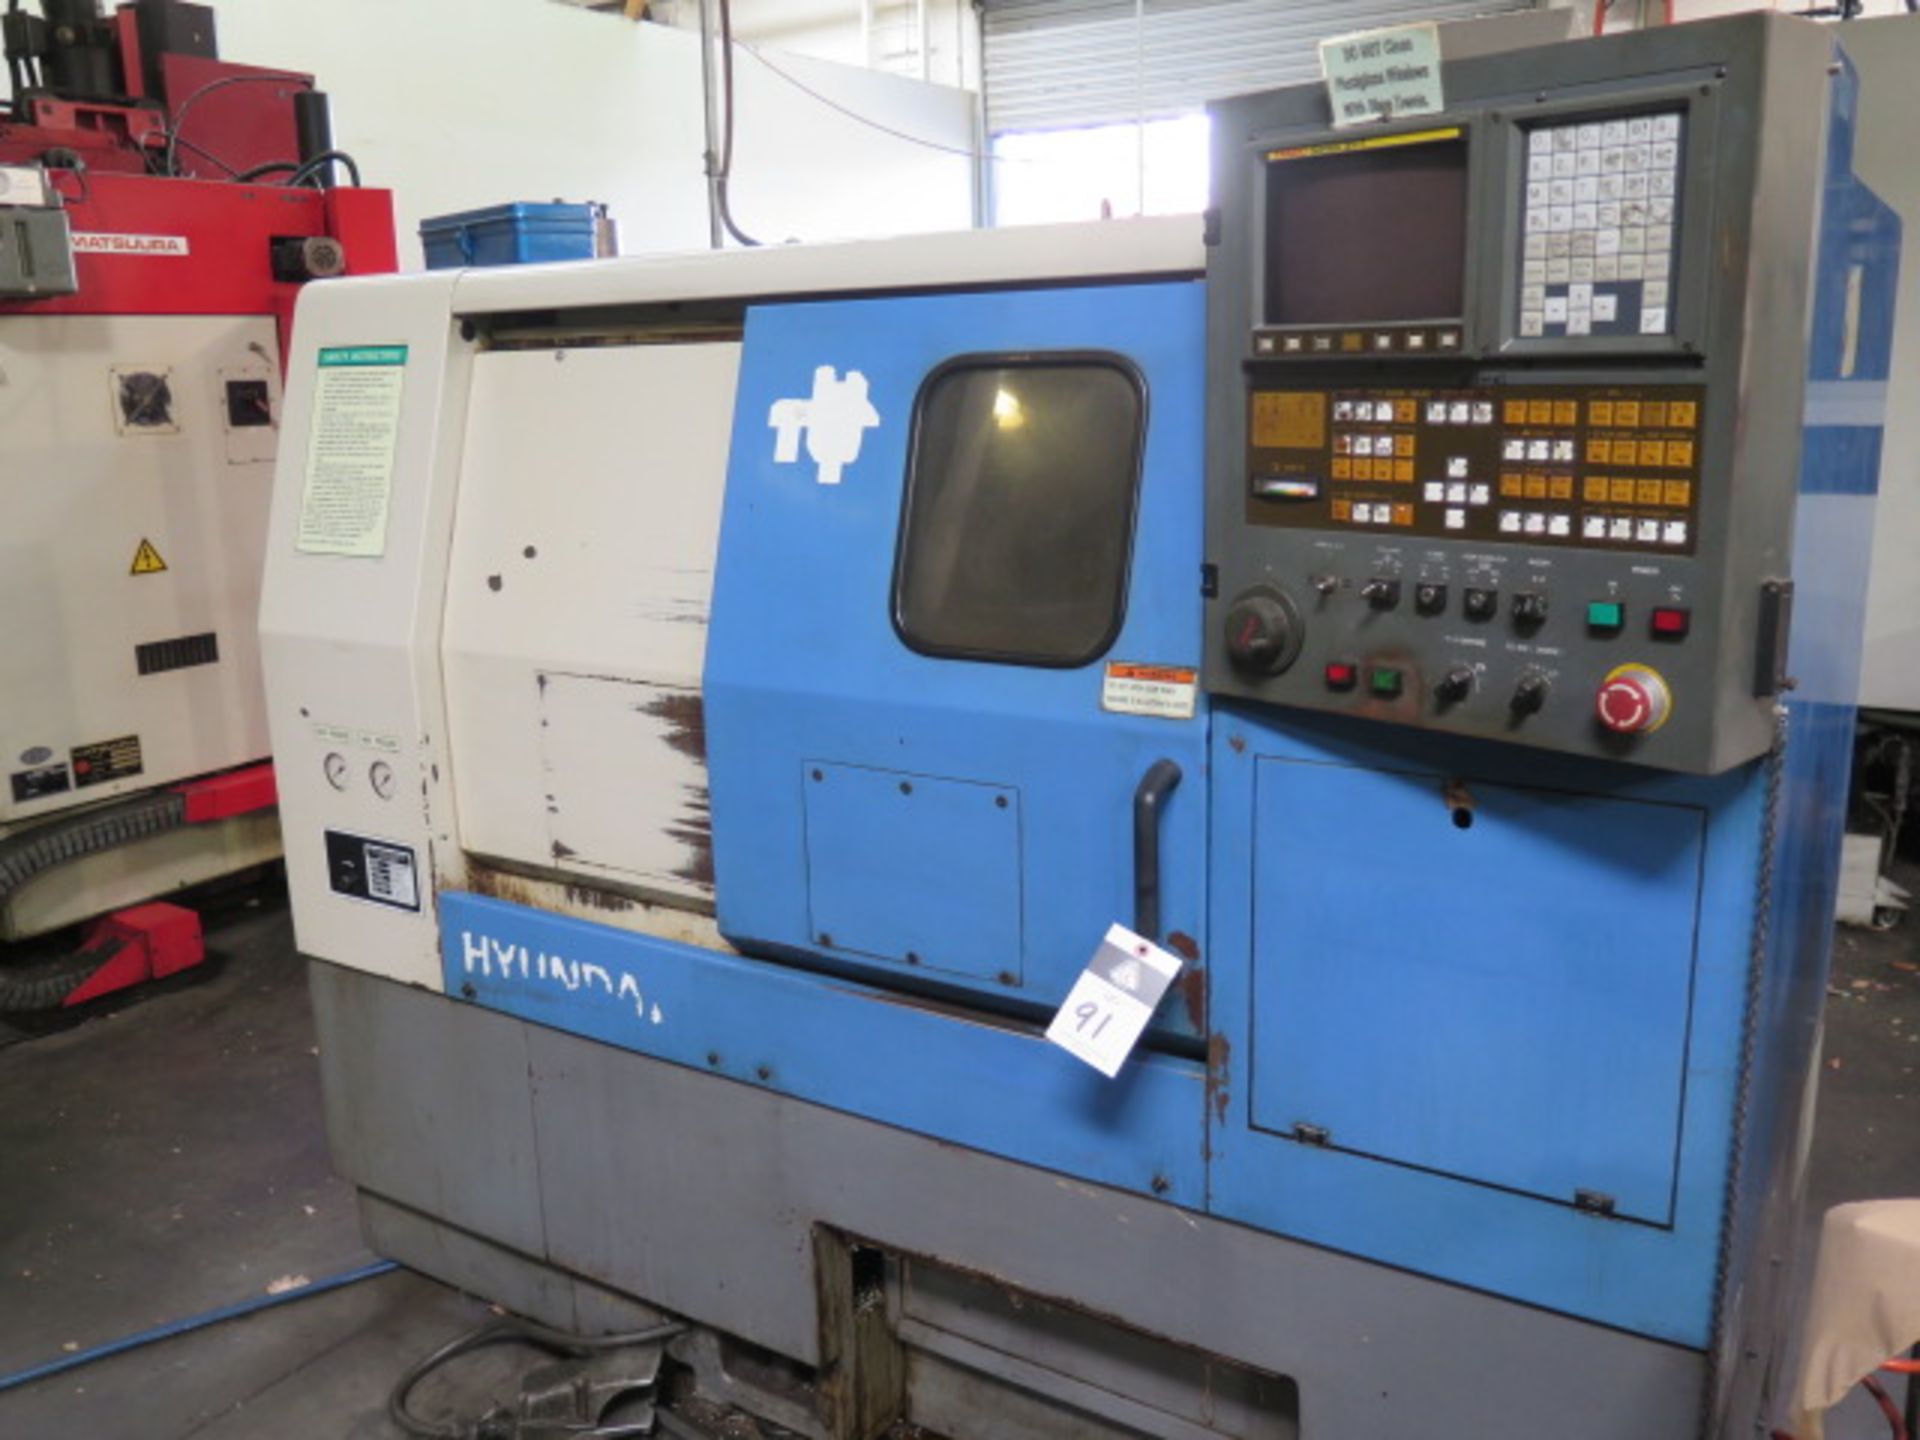 2000 Hyundai HIT0400G CNC Cross Slide Lathe s/n 1200A136 w/ Fanuc Series 21-T Controls, SOLD AS IS - Image 2 of 12